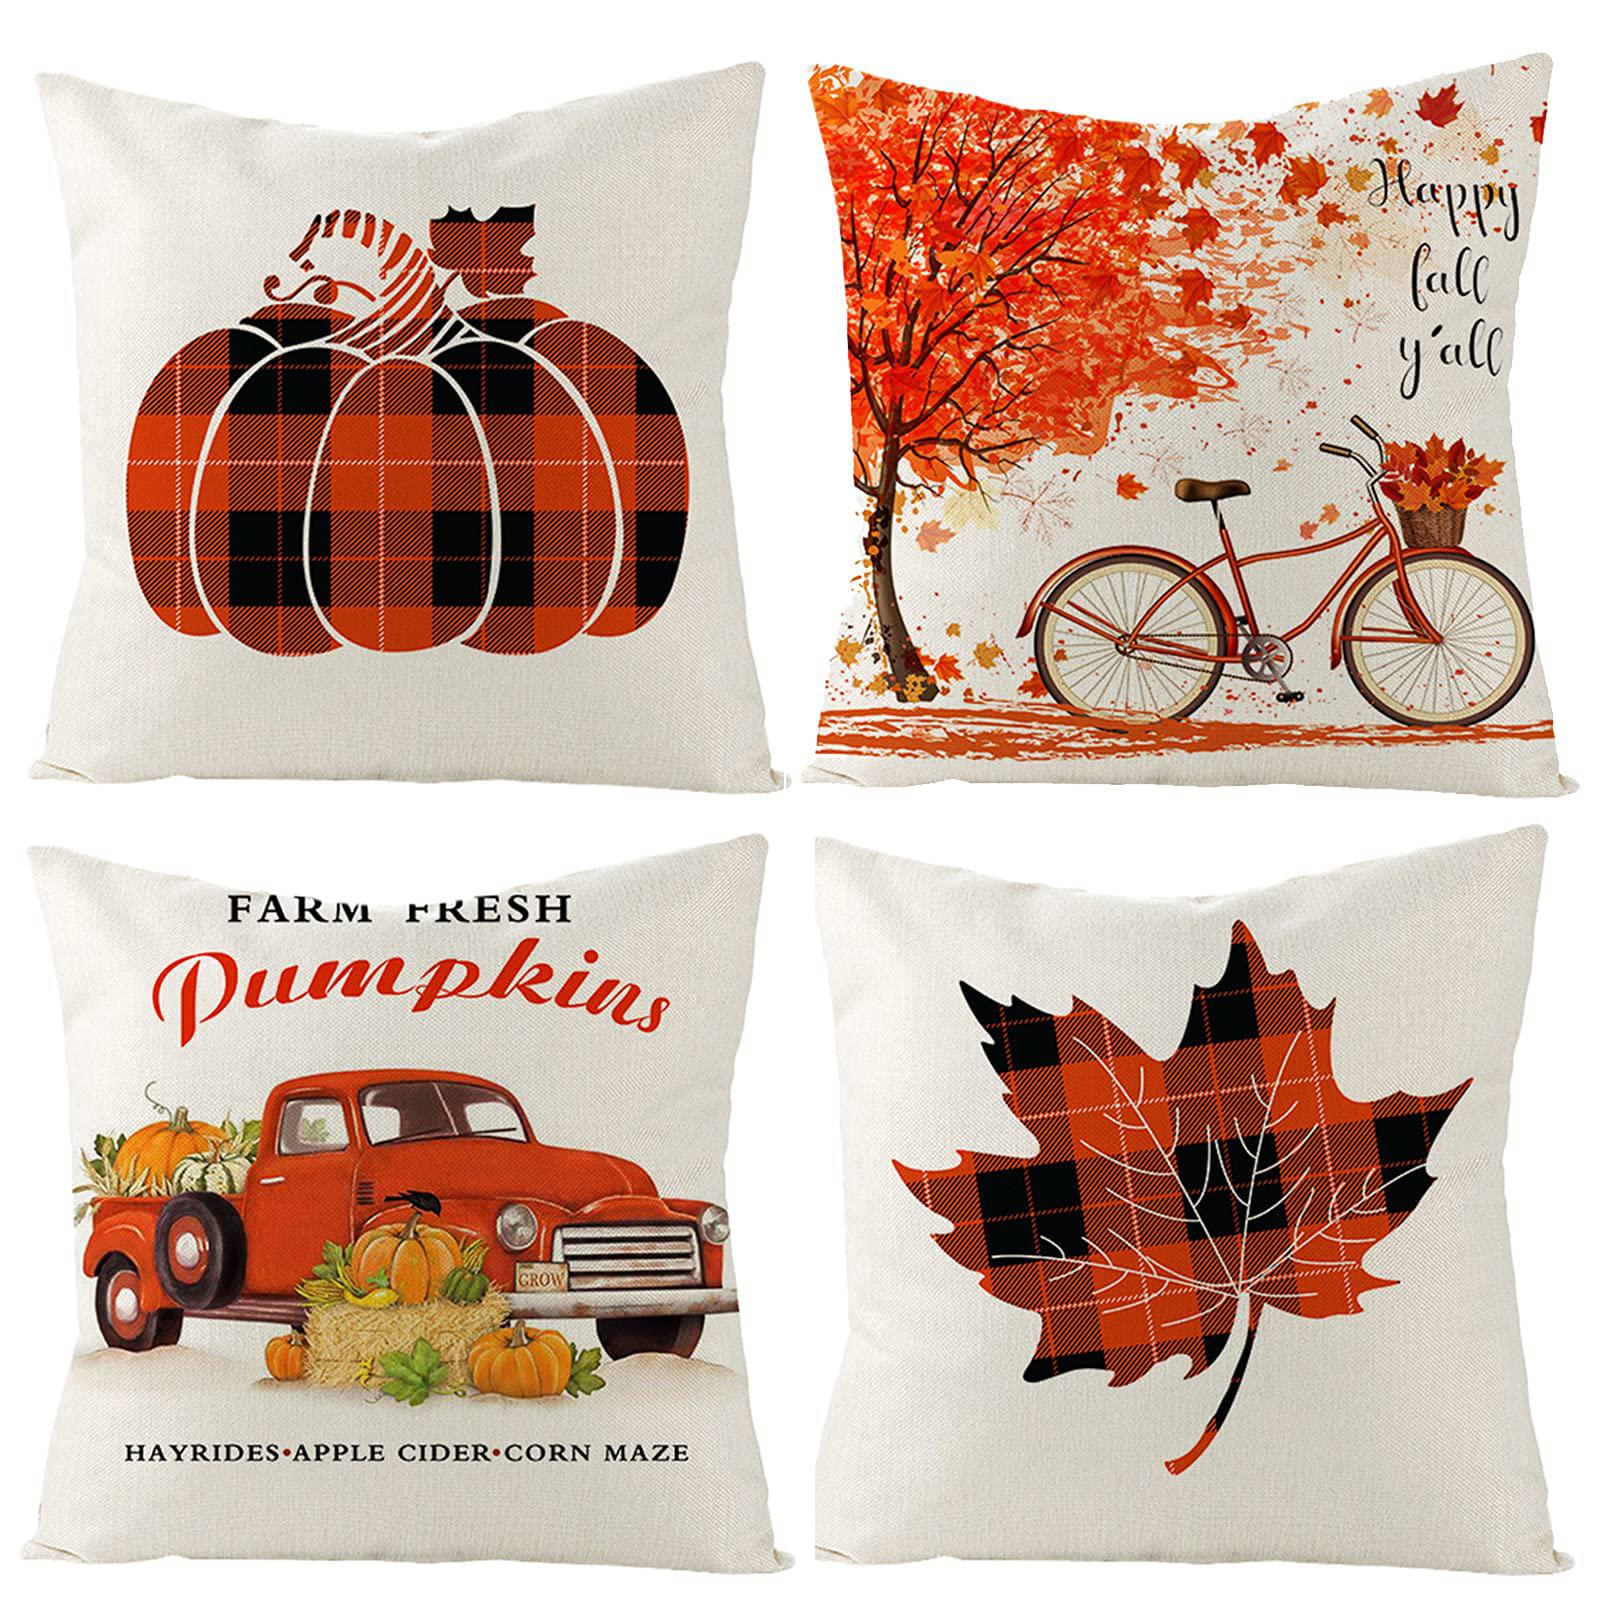 UBING fall pillow covers 18x18 set of 4 thanksgiving day throw pillow covers for autumn decoration, buffalo plaid pumpkin maple pil